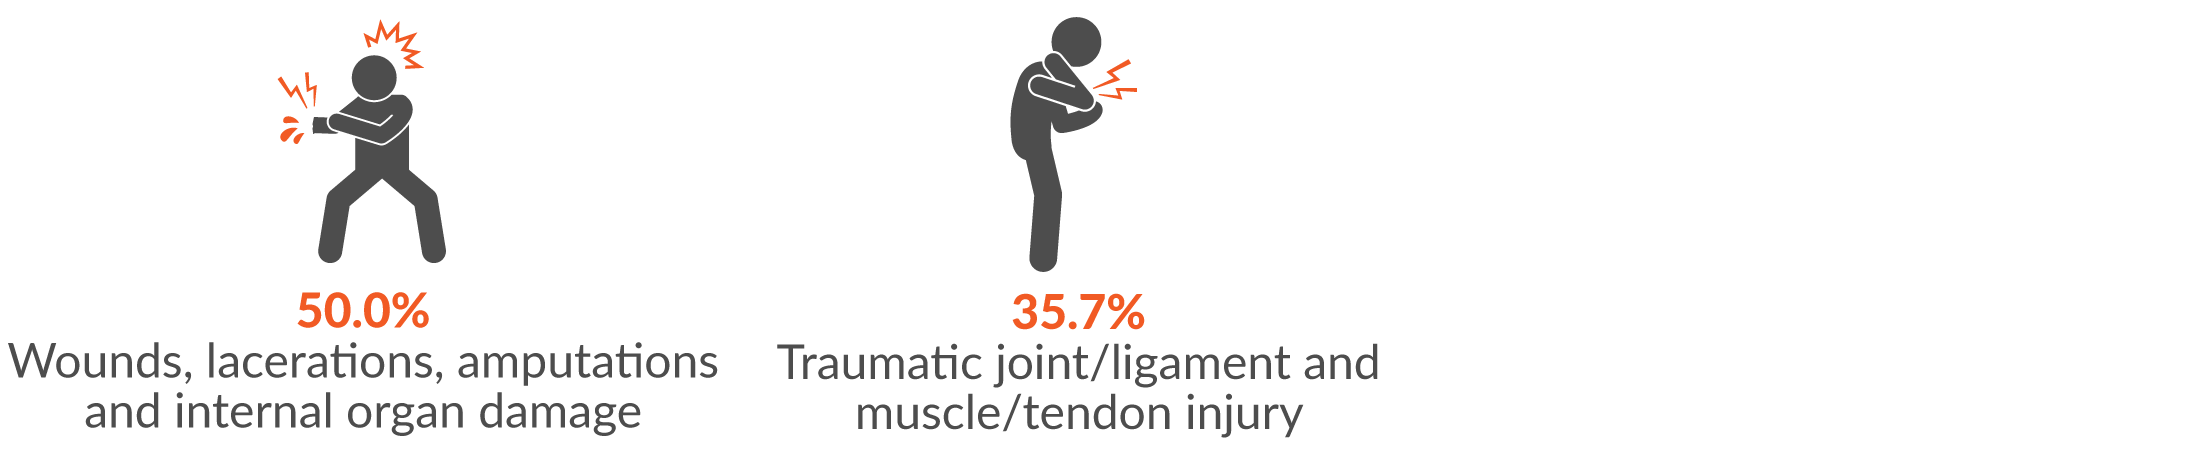 This infographic shows the main two injury groups resulting from being hit by moving objects were 50% wounds, lacerations, amputations and internal organ damage; and 35.7% traumatic joint/ligament and muscle/tendon injury.